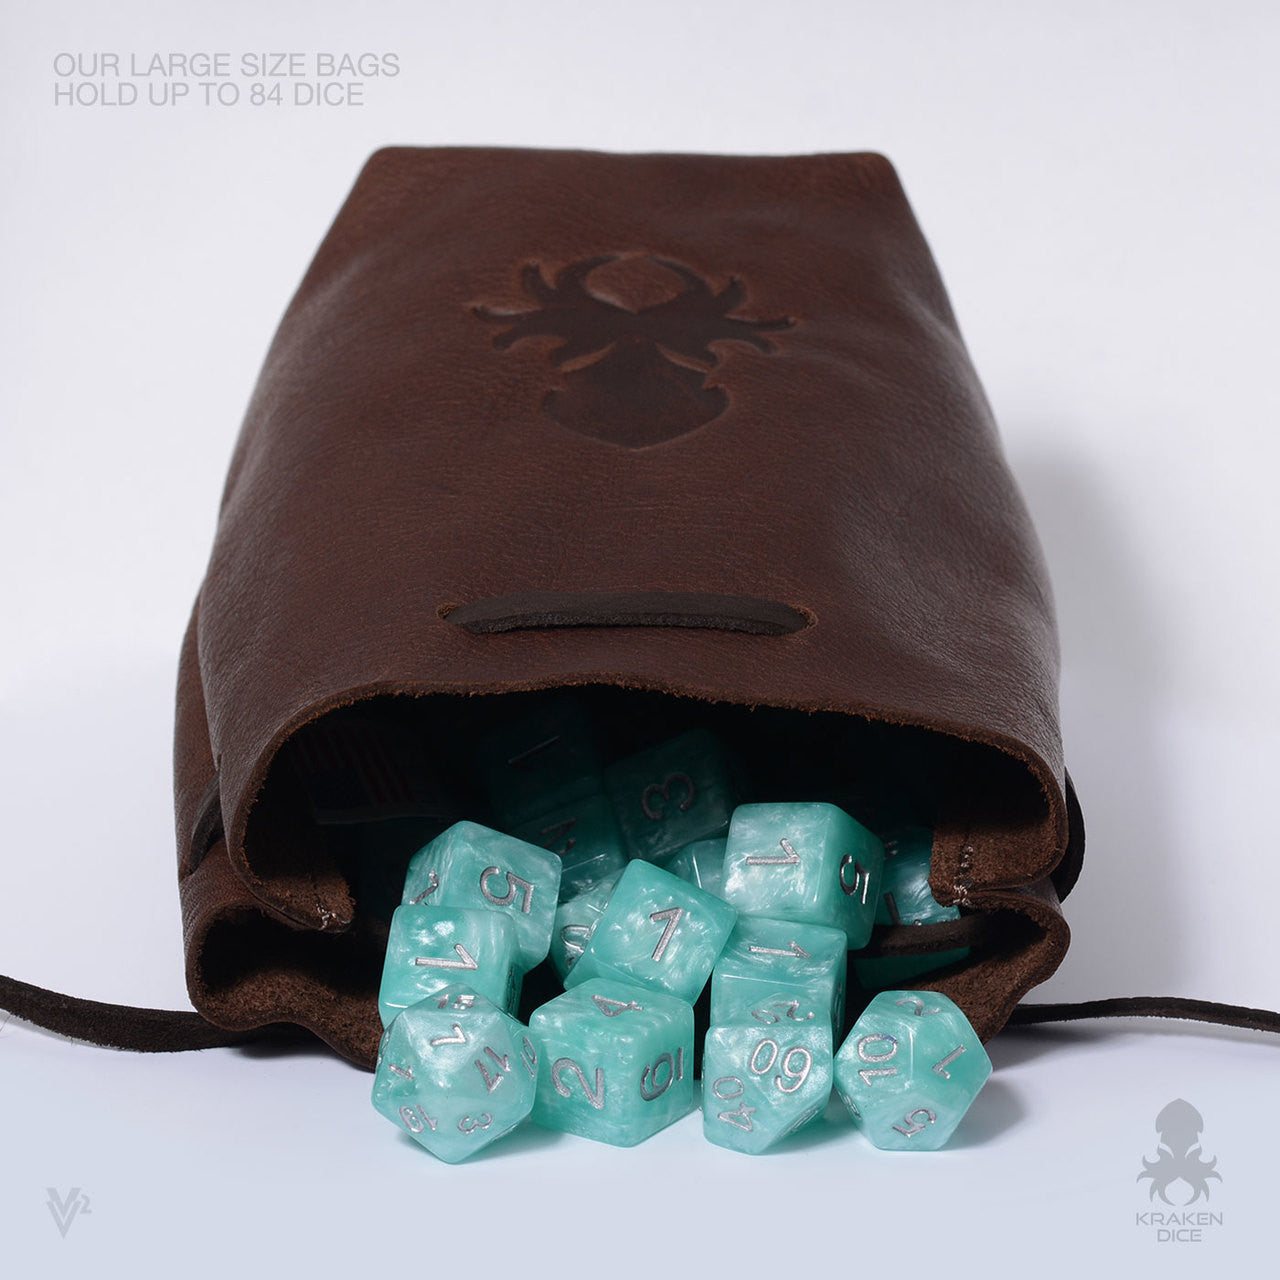 Freestanding Large Dice Bag In Brown Leather